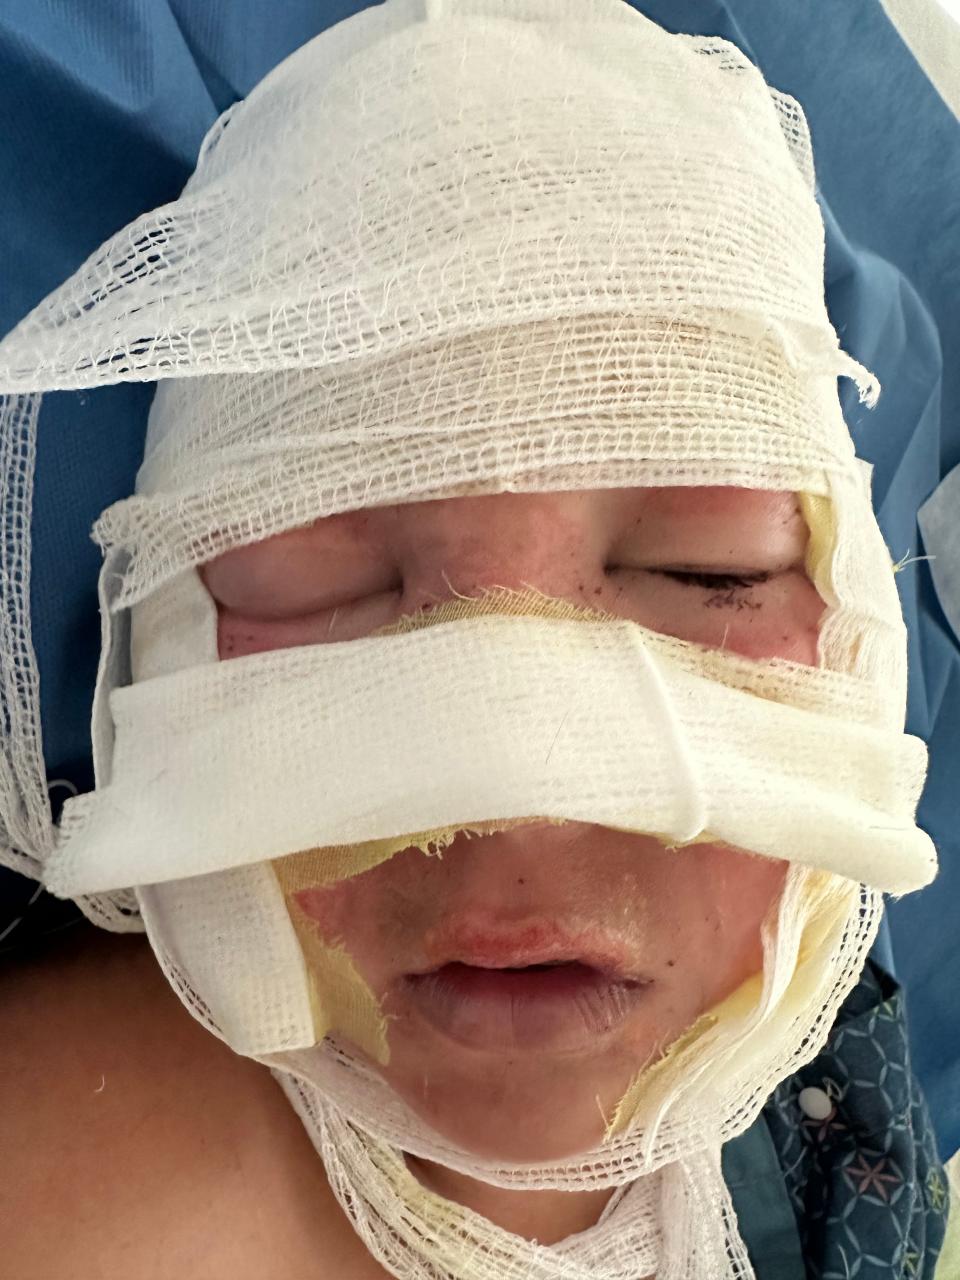 City resident Connor Snoke, 11, was severely injured on July 19 by an exploding aerosol can, but is expected to make a complete recovery. Connor wanted the Eagle-Gazette to publish this photo as a warning to other children.